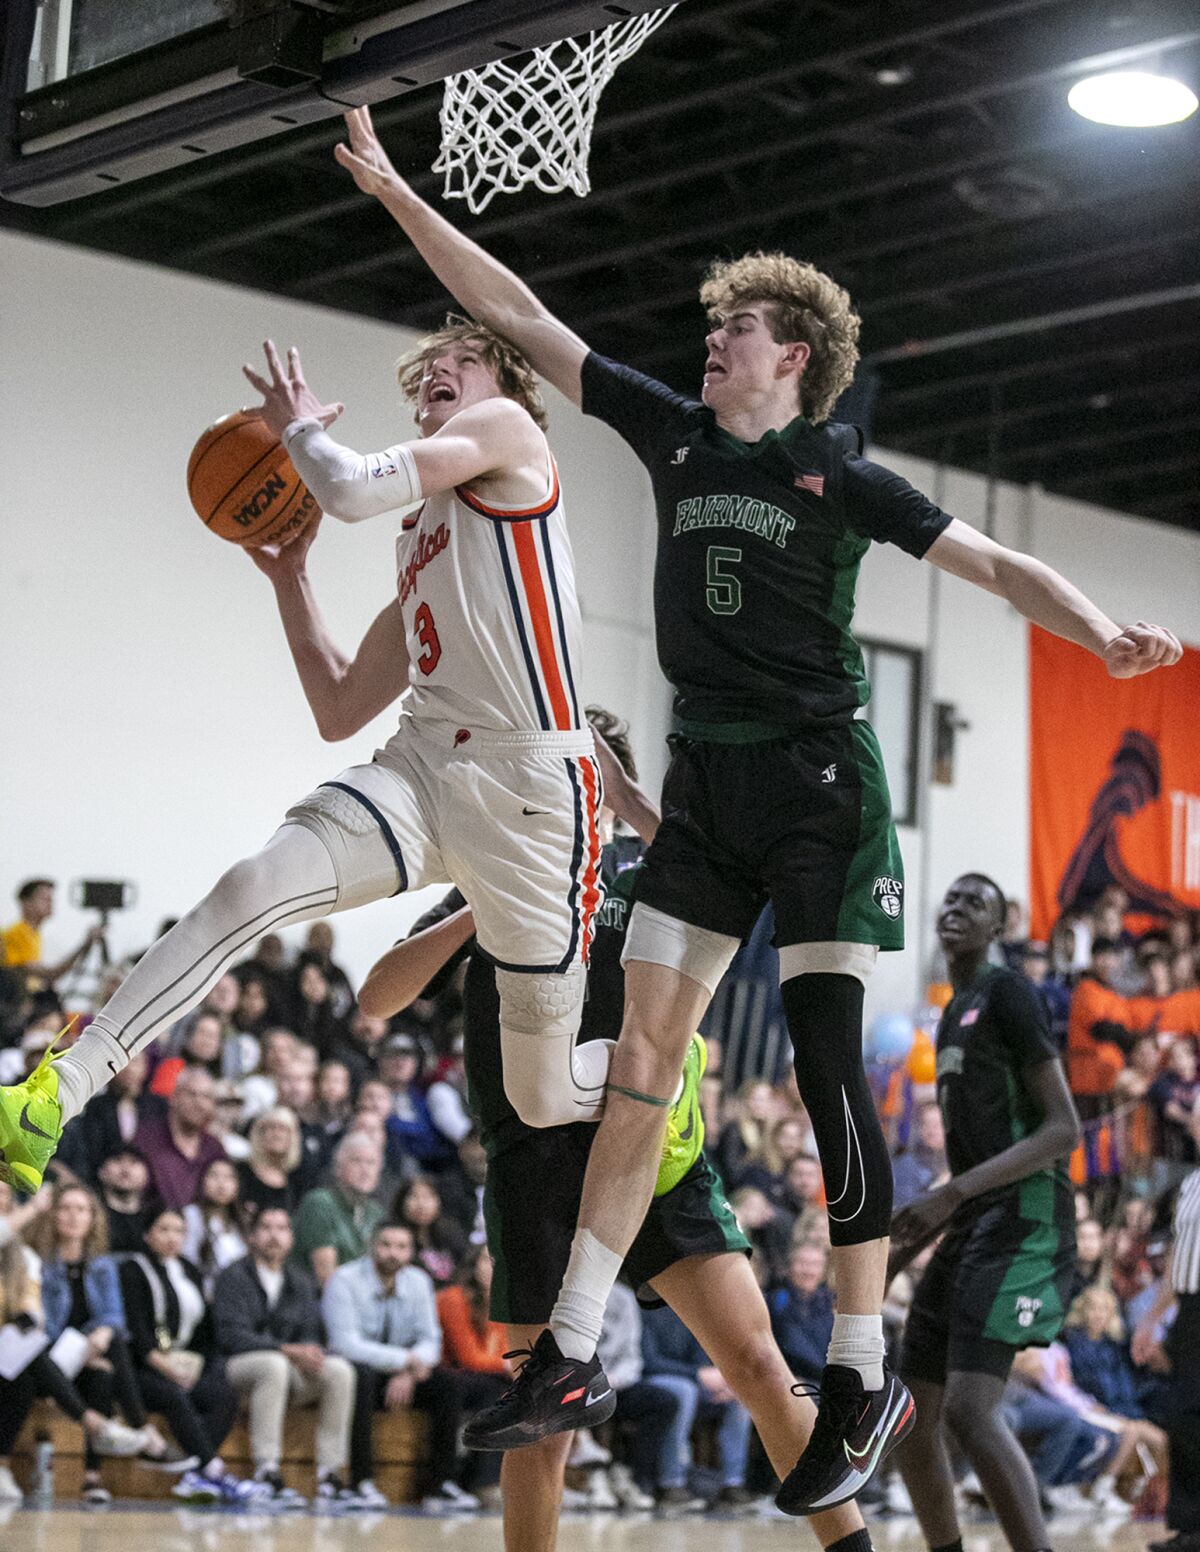 Pacifica Christian Orange County's Parker Strauss drives to the basket against Fairmont Prep during Friday's game.